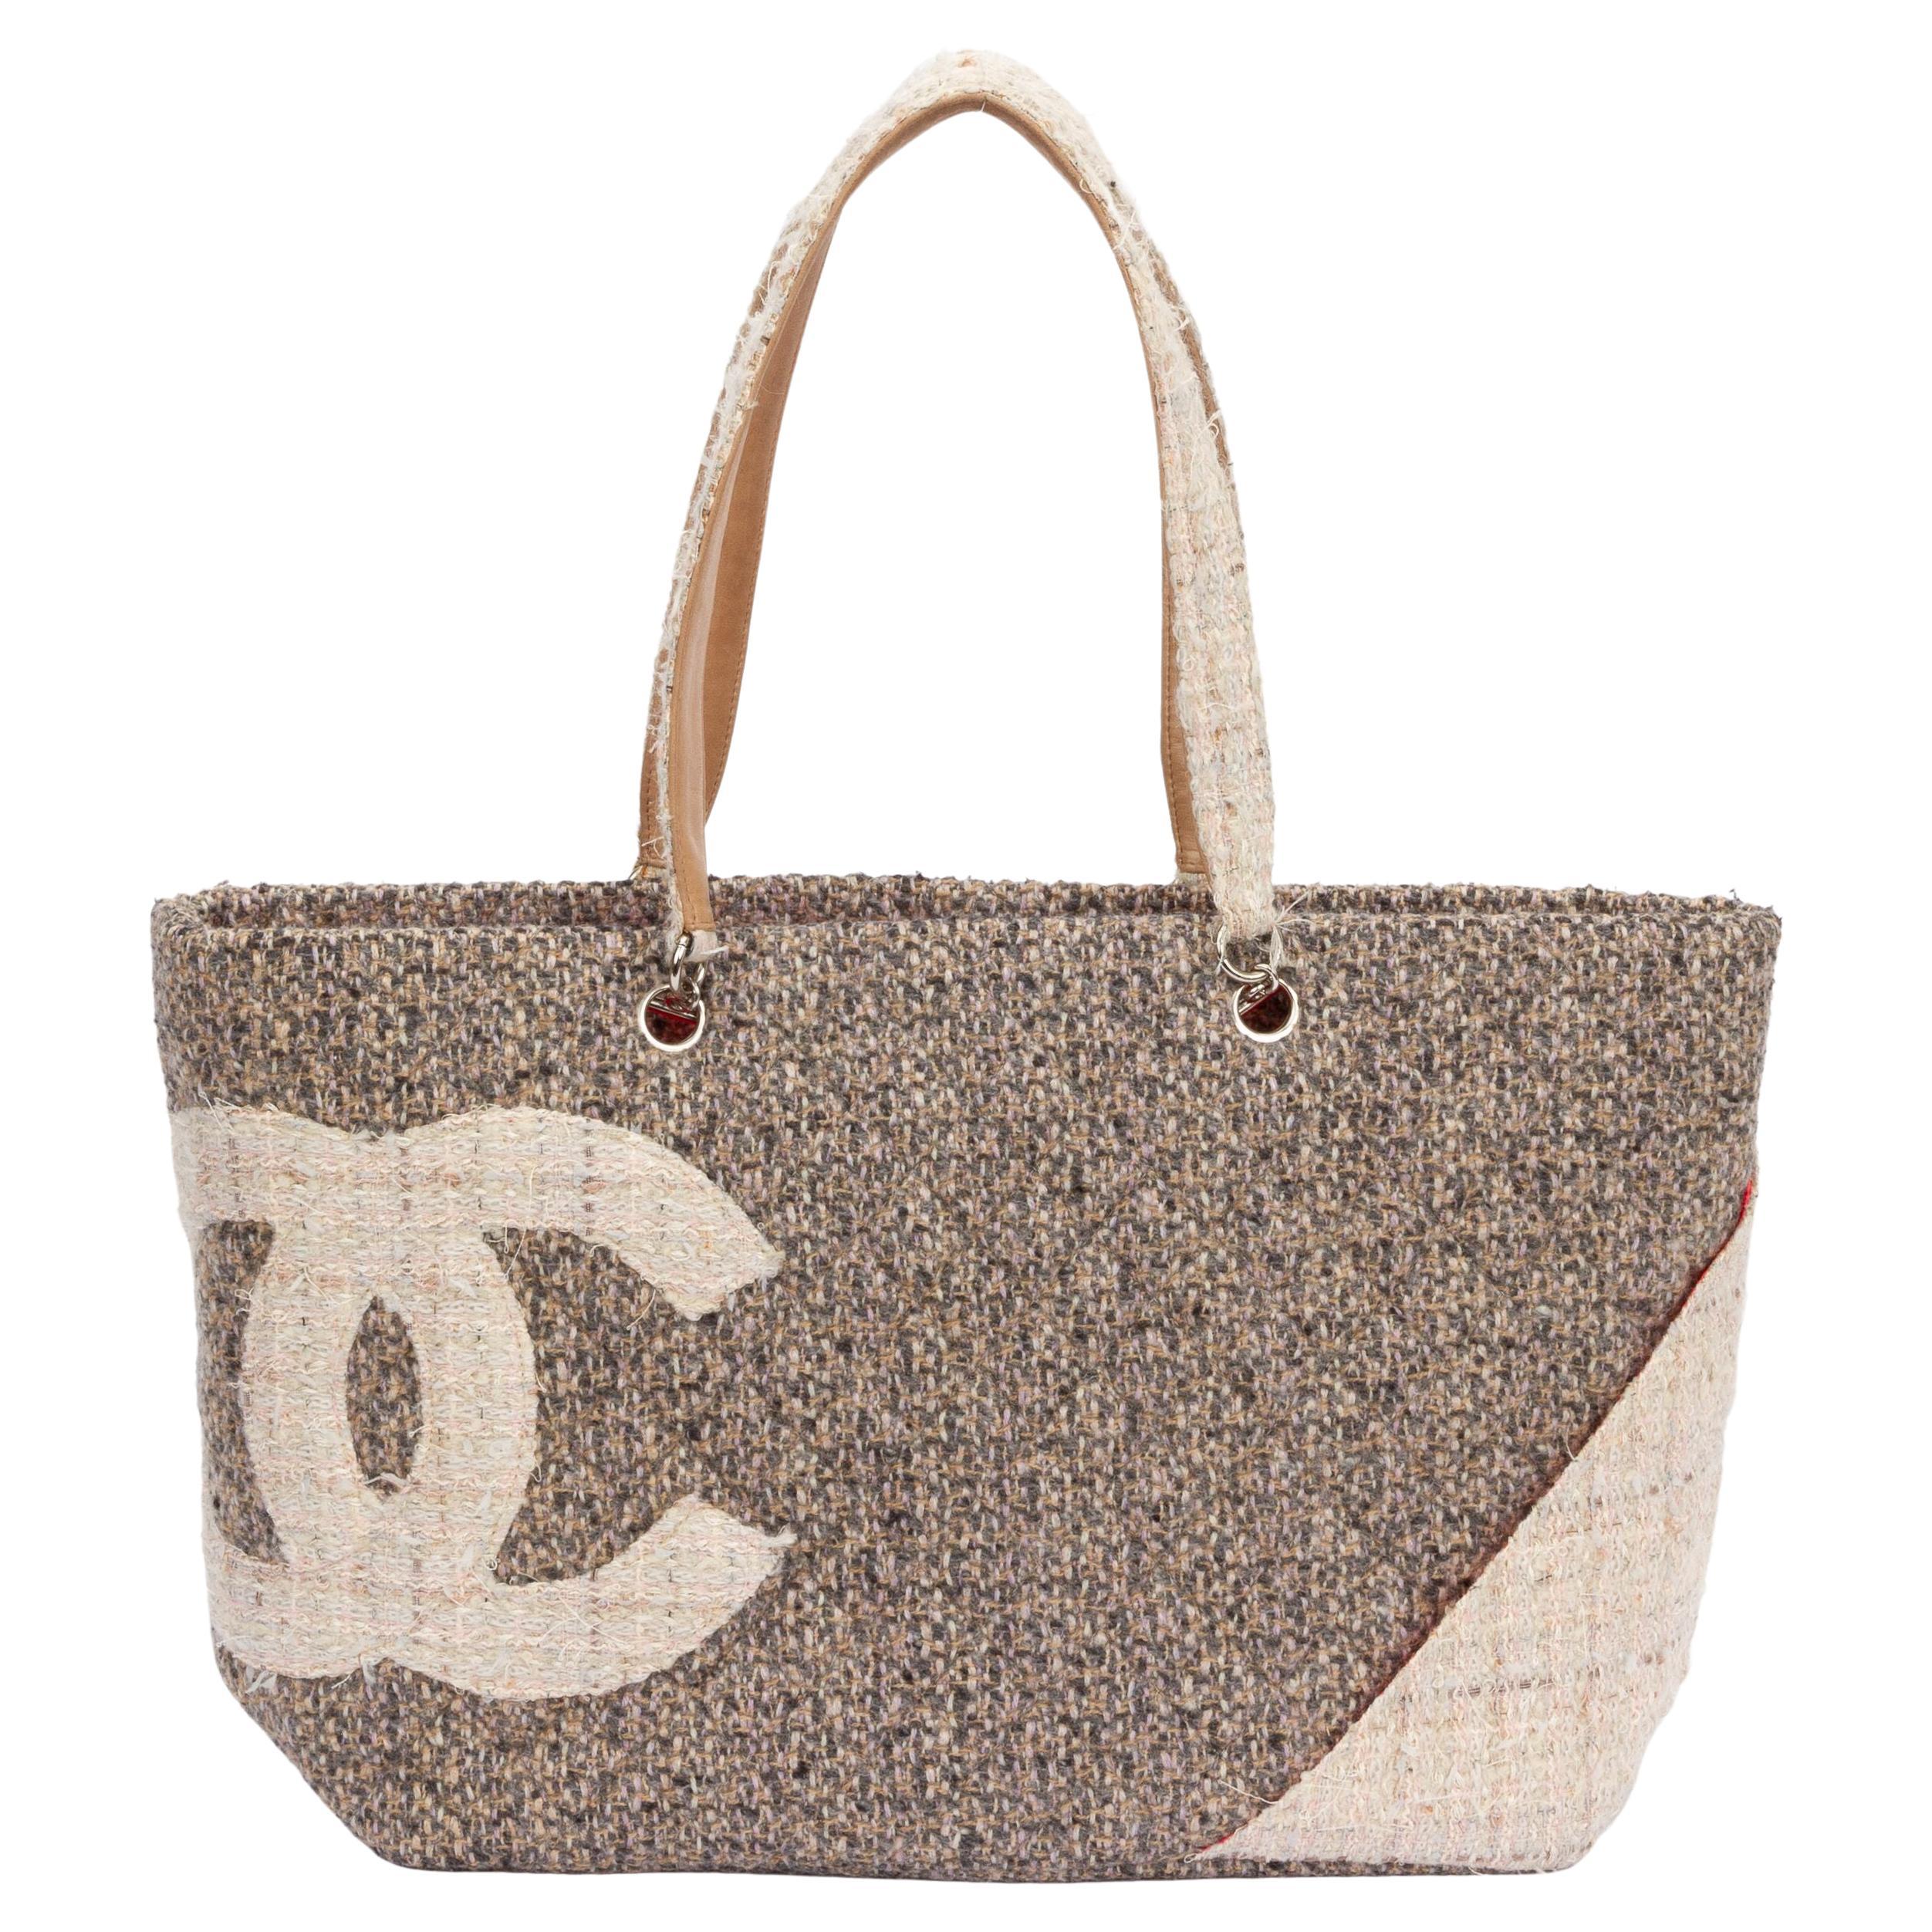 Chanel Shopping Bags - 298 For Sale on 1stDibs  chanel shopper tote, chanel  shopper bag, chanel grand shopping tote price 2021